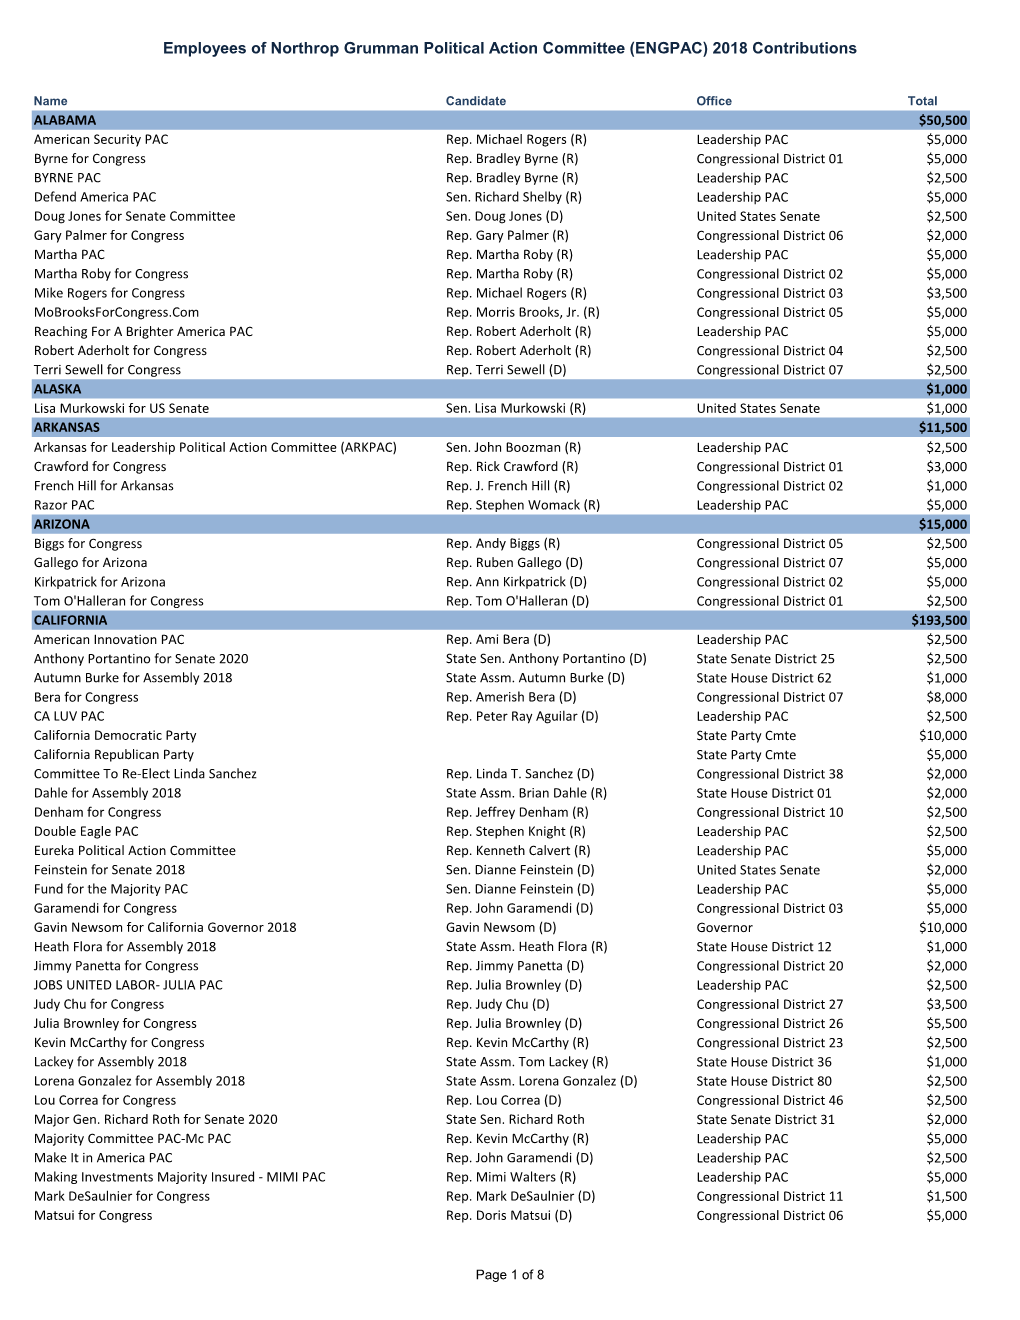 Employees of Northrop Grumman Political Action Committee (ENGPAC) 2018 Contributions